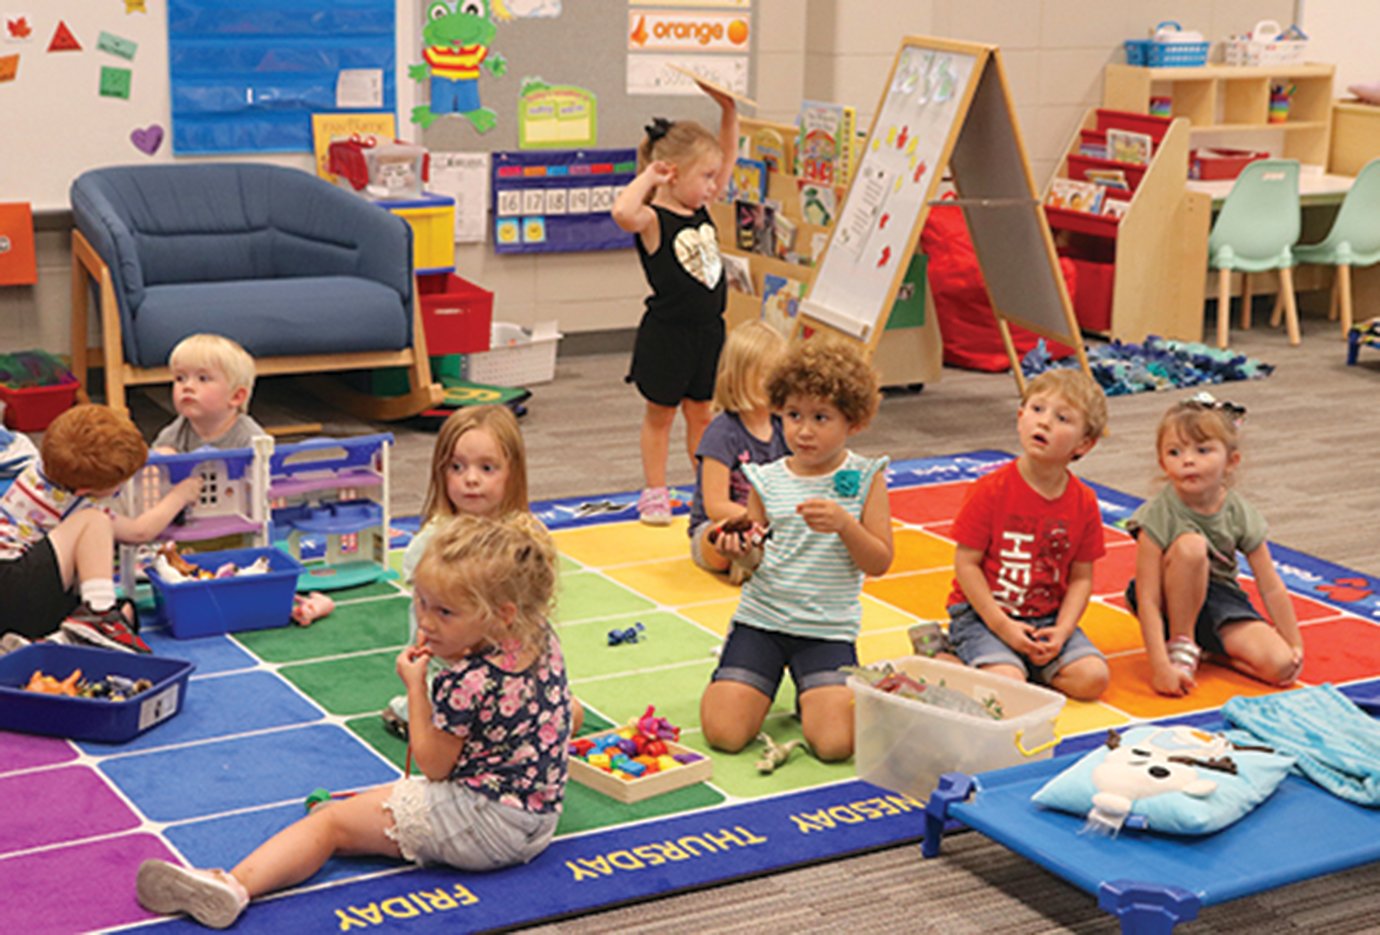 North Montgomery's Early Learning Academy and New Hope Christian Preschool will see additional students this year by way of scholarships awarded by the Community Foundation.